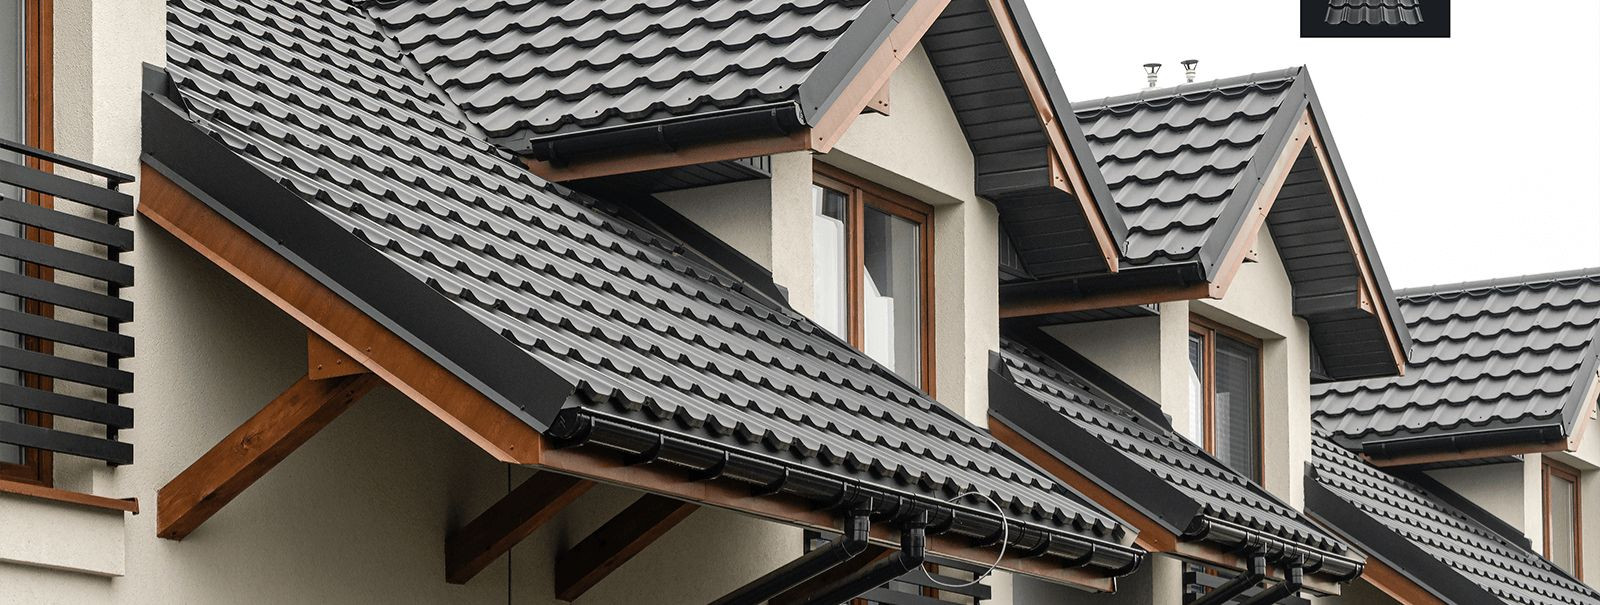 Modular roofing is a modern roofing solution that consists of pre-fabricated panels or tiles designed for easy and quick installation. This innovative approach 